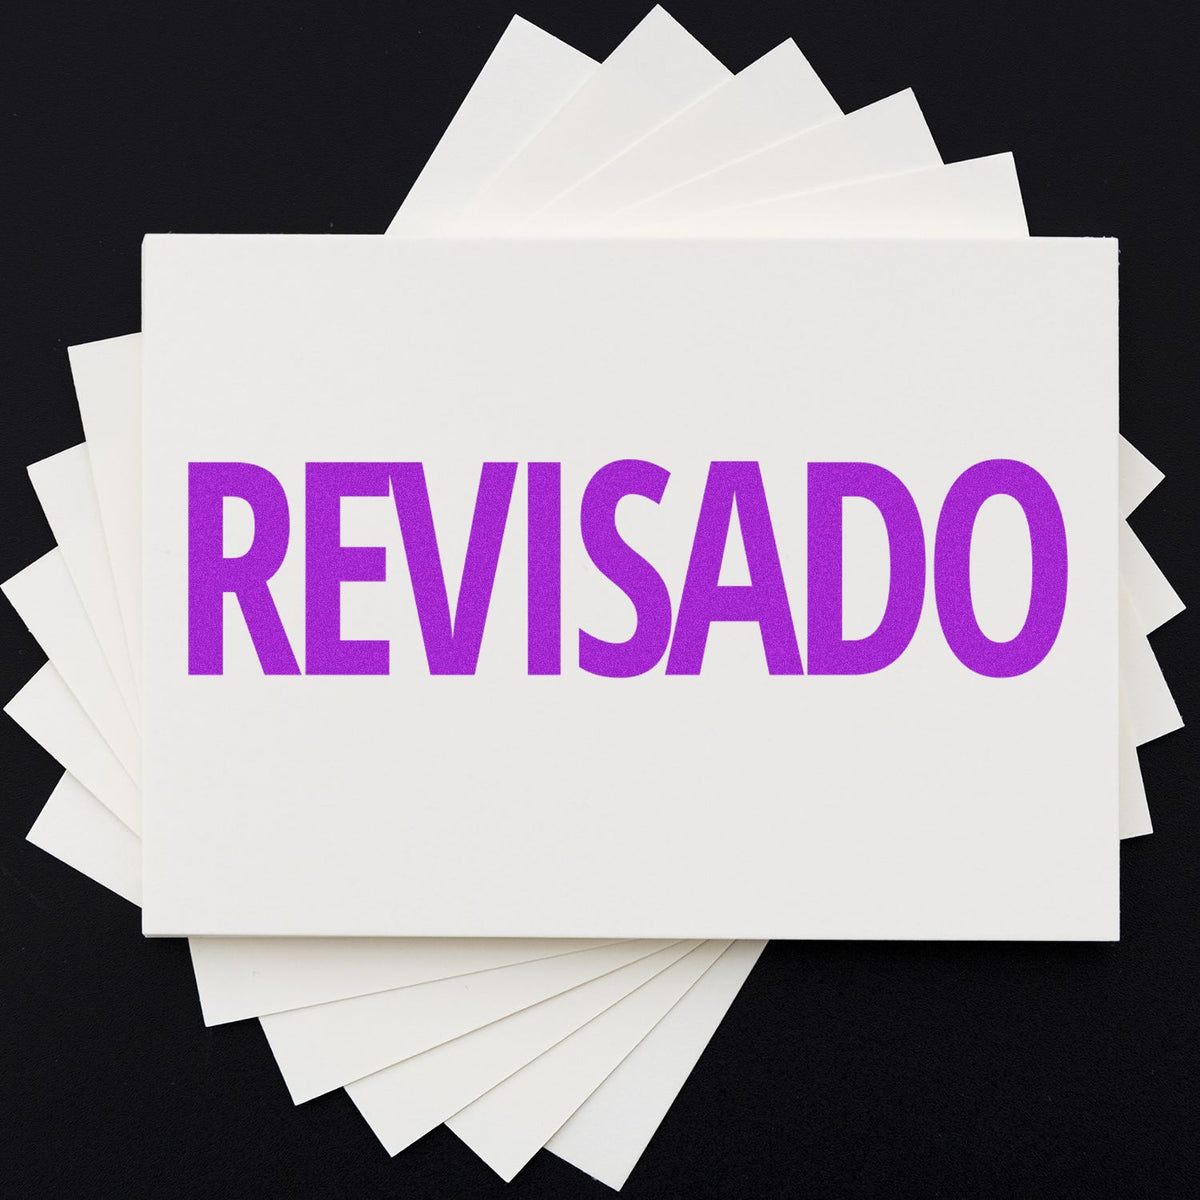 Large Revisado Rubber Stamp In Use